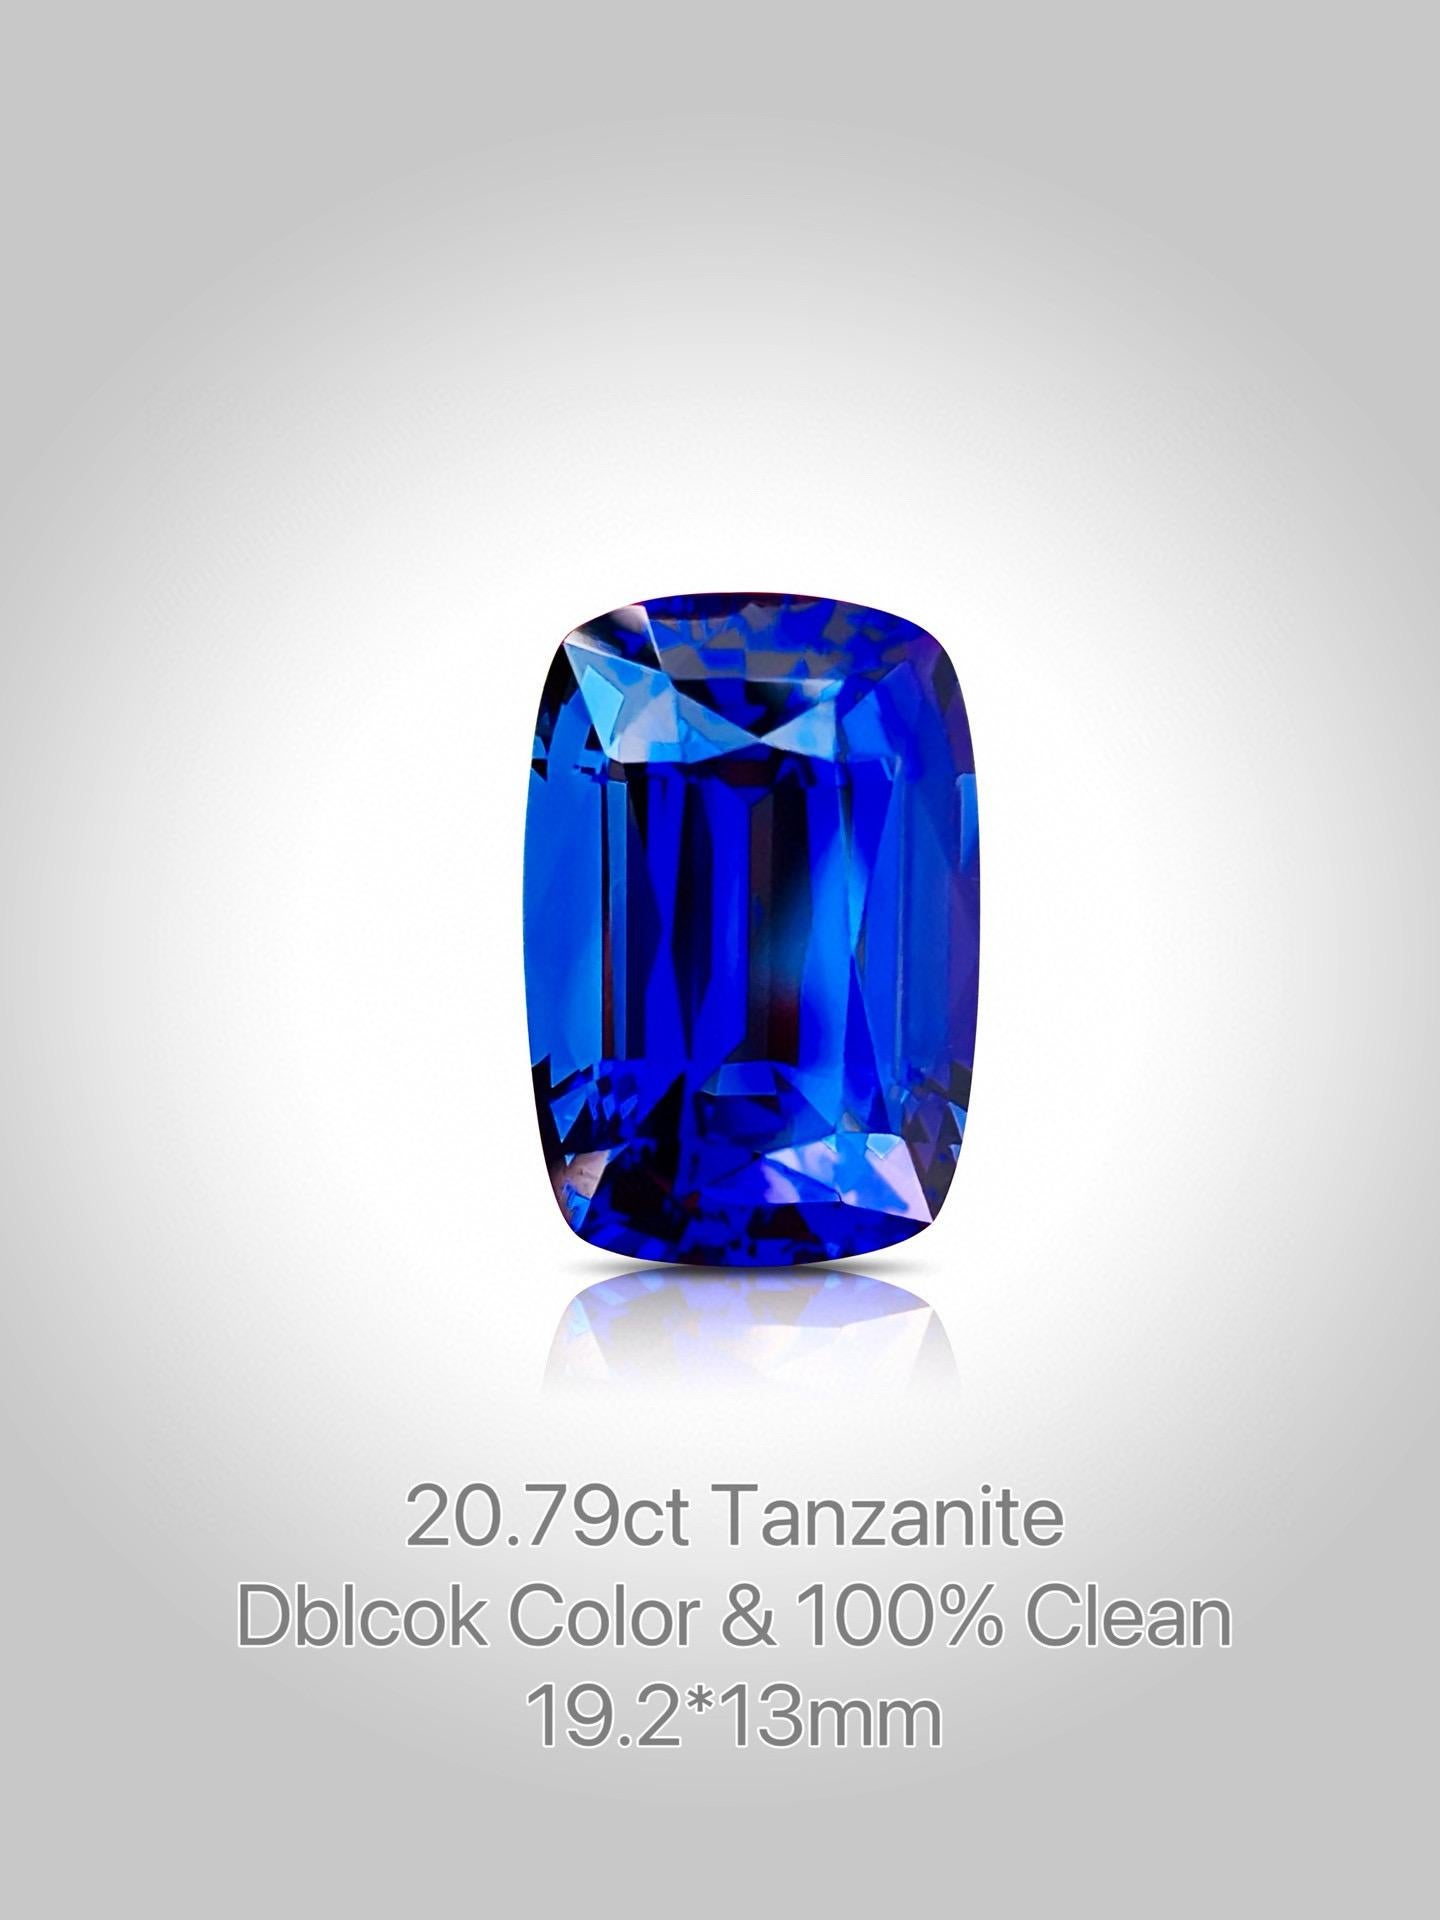 Cushion Cut Collection  20.79ct tanzanite at top color Dblock royal blue plus For Sale